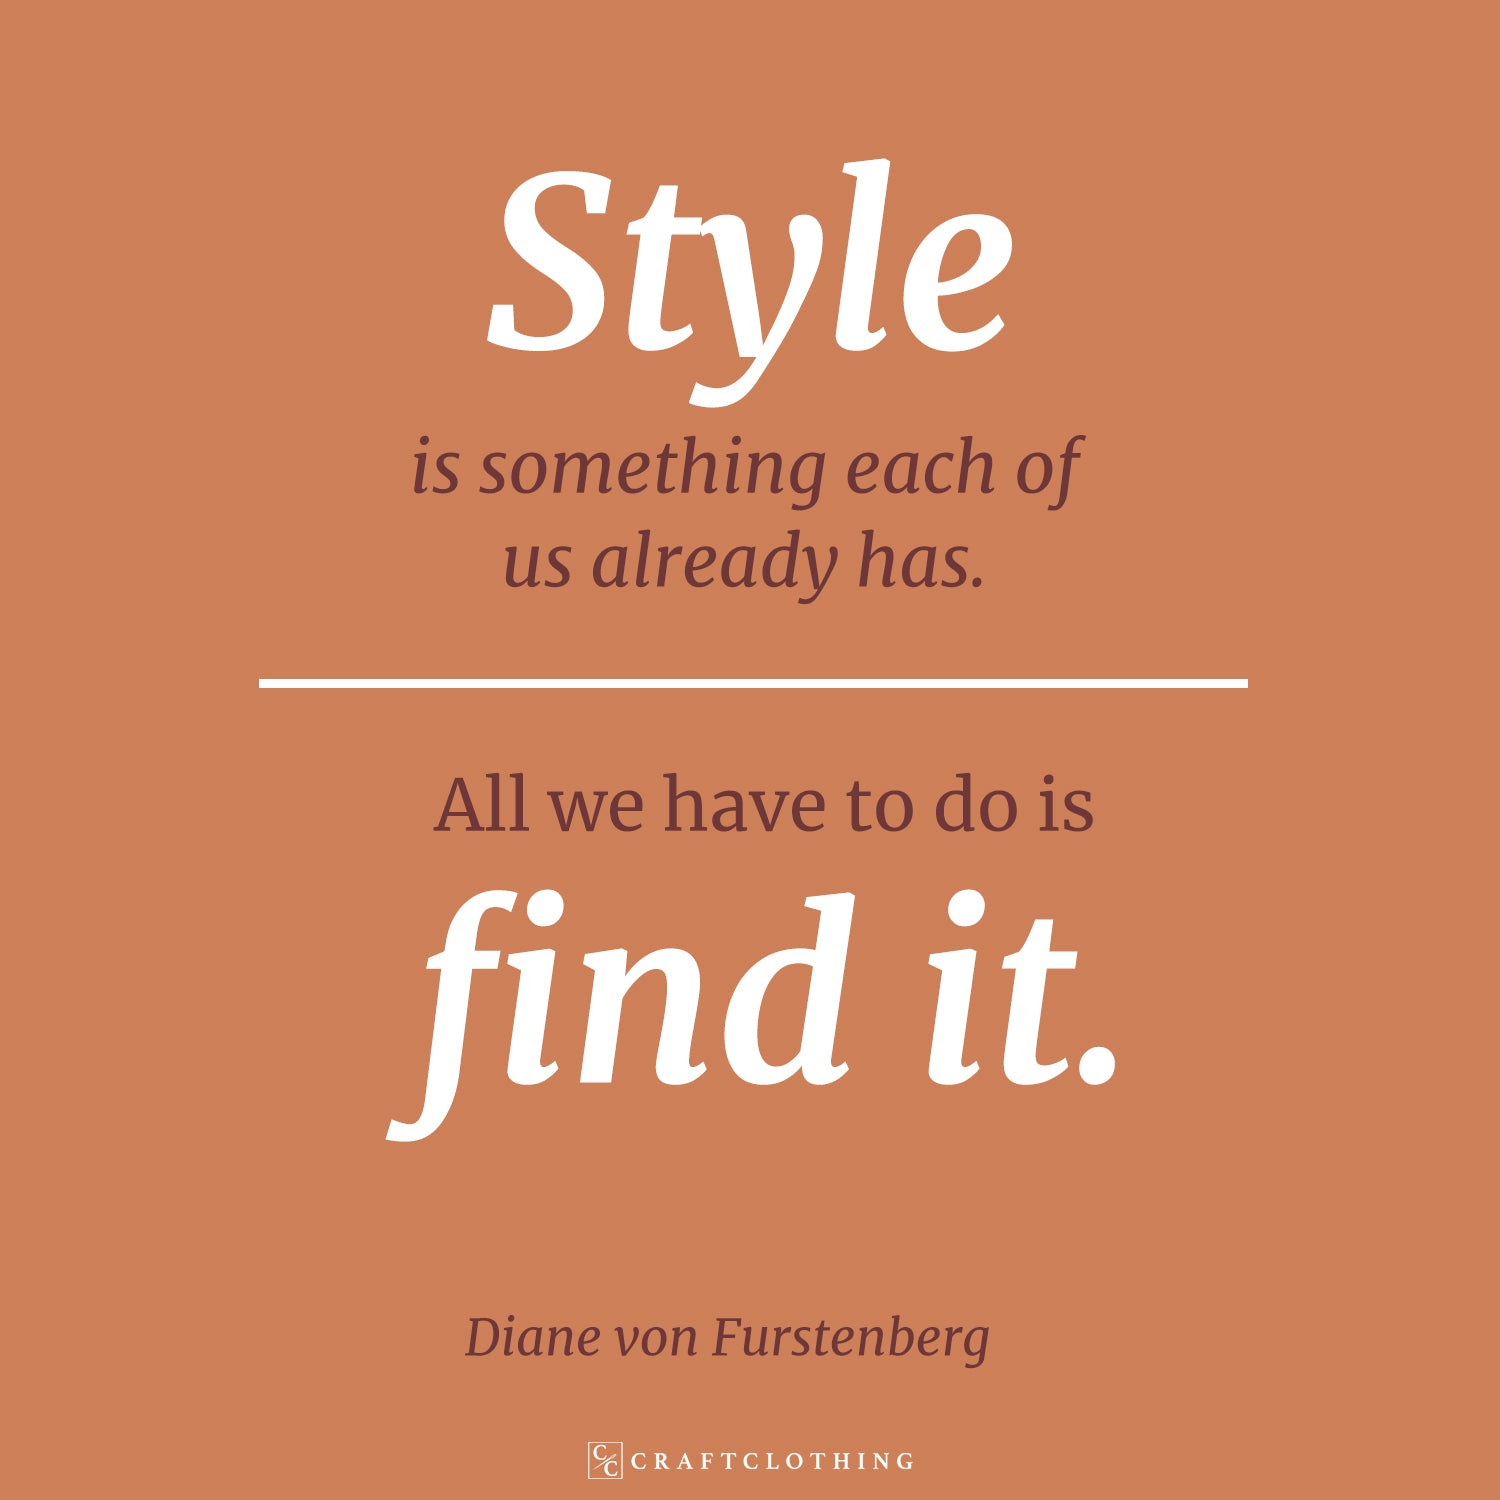 Style is something each of us already has. All we have to do is find it.